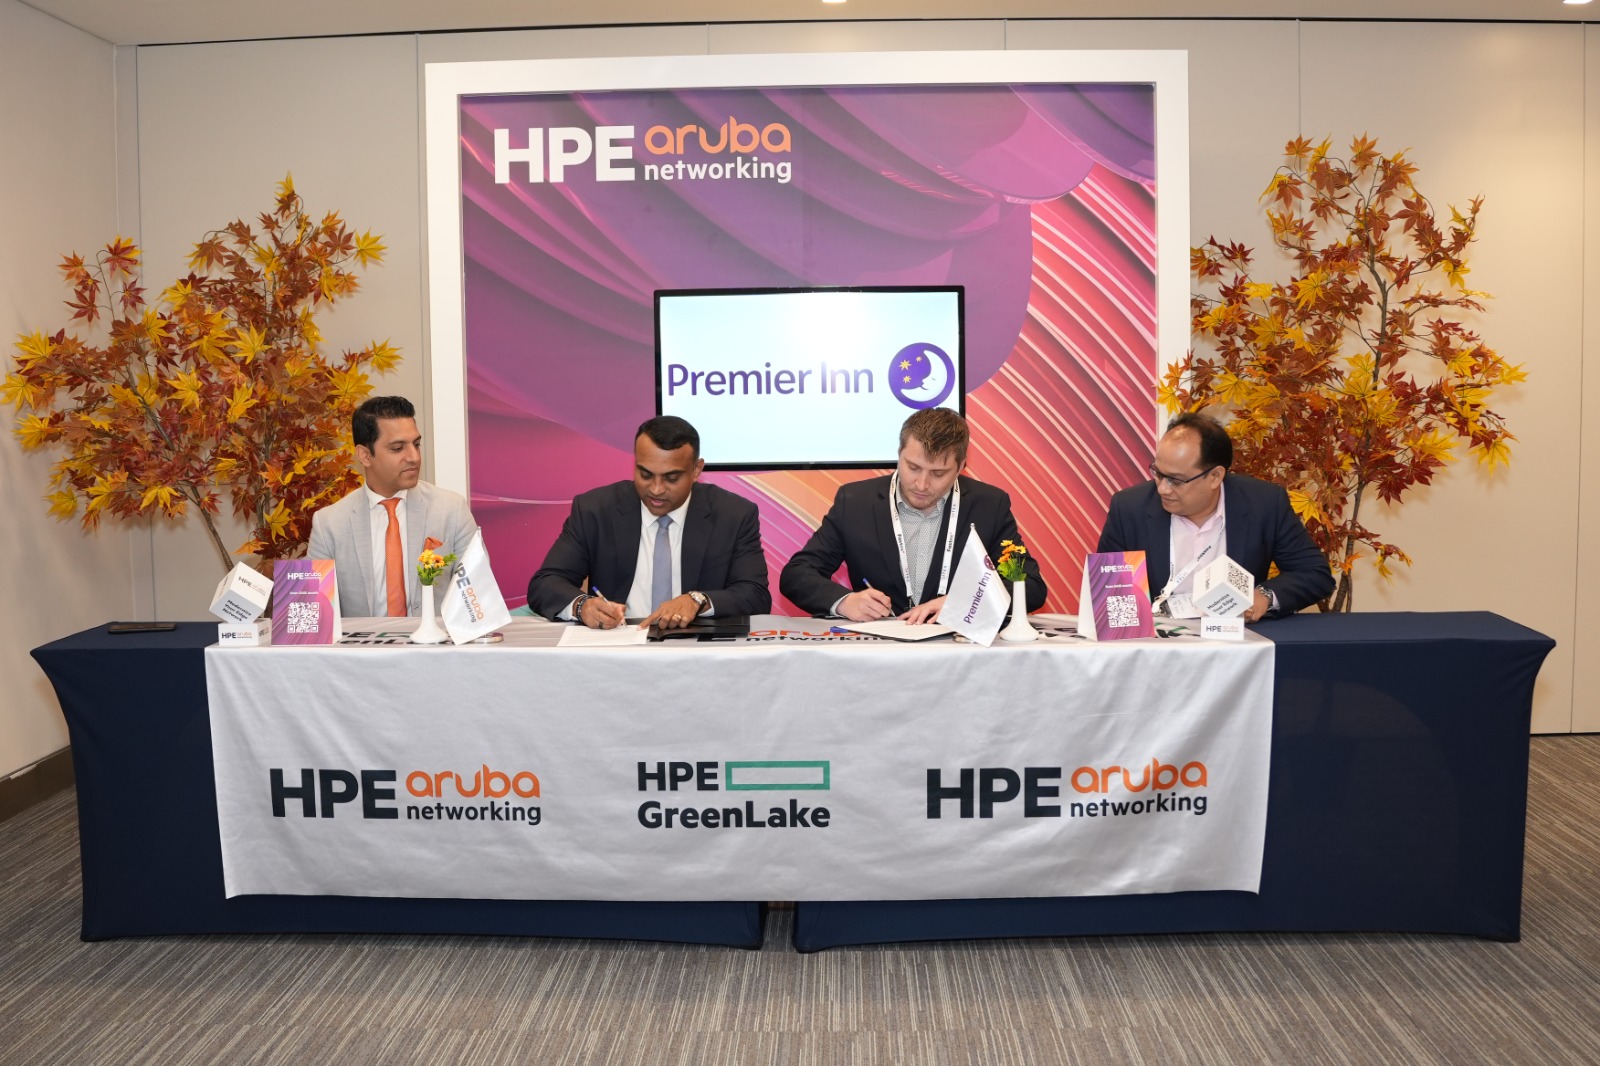 Premier Inn Middle East Elevates Guest Experience with HPE Aruba NetworkingPremier Inn Middle East Elevates Guest Experience with HPE Aruba Networking